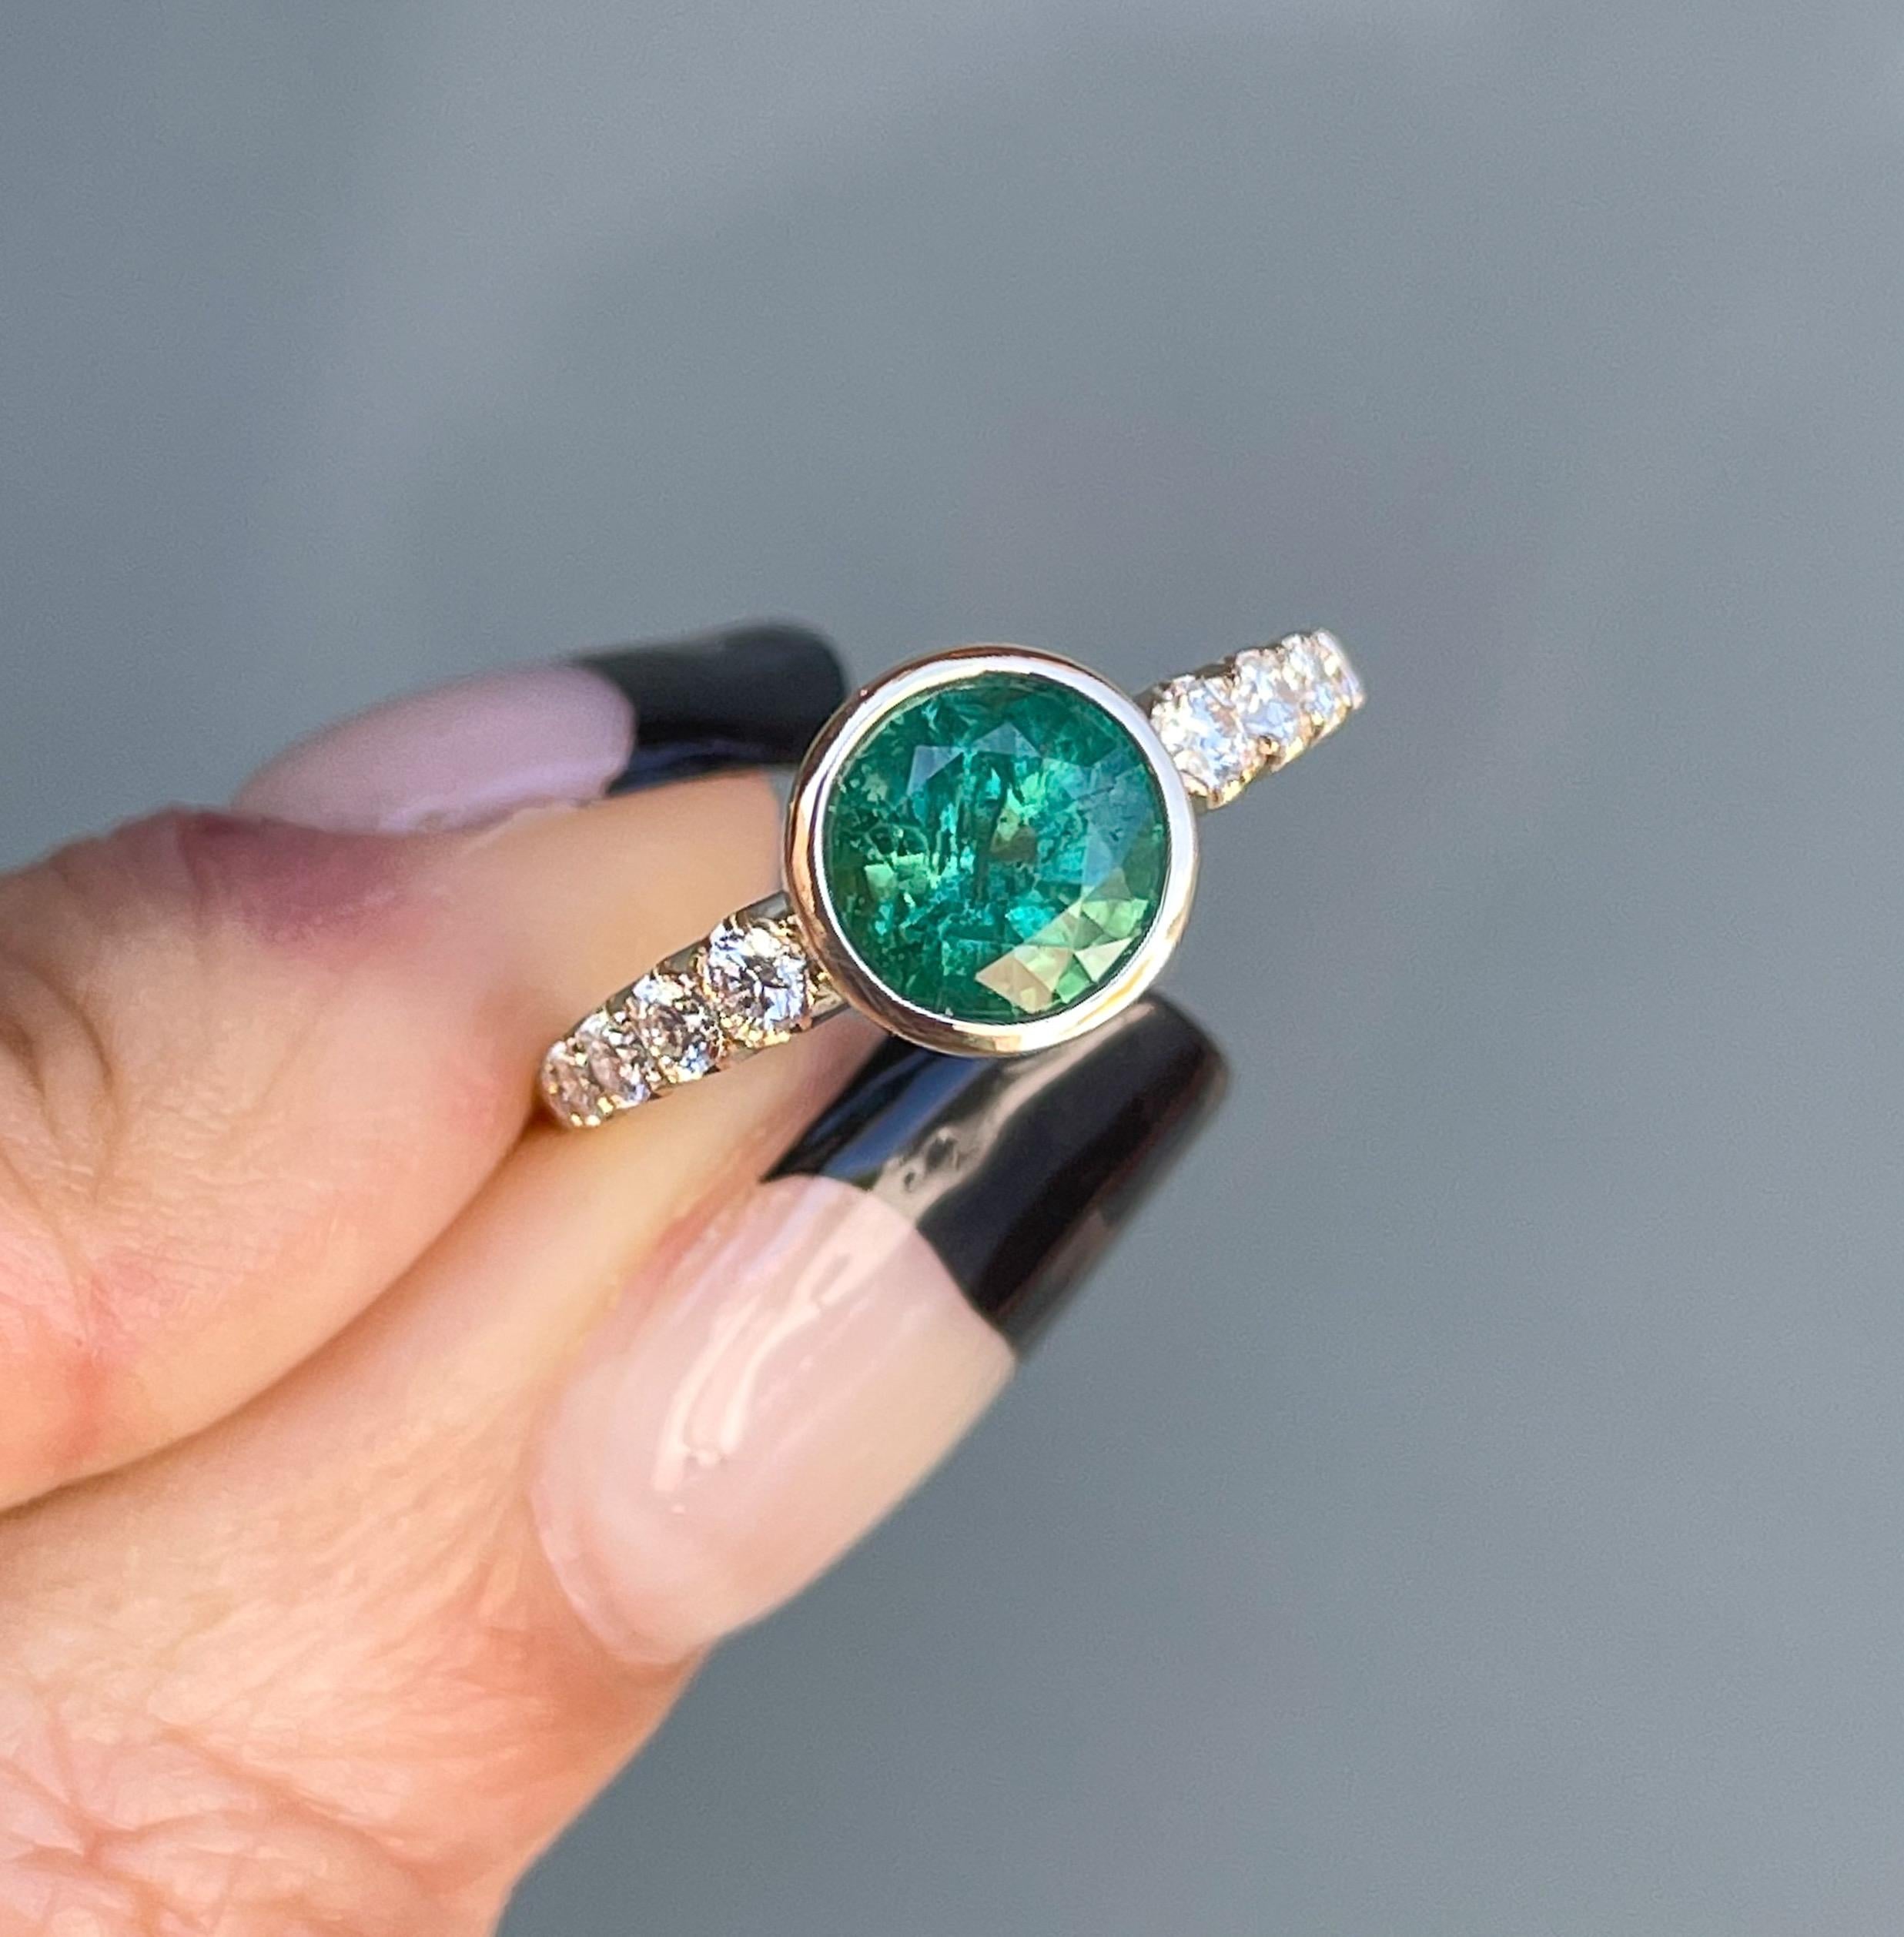 Imagine early morning in the garden as dew drops bead upon verdant foliage — this moment is captured in the Denouement Emerald and Diamond Ring. A stunning Colombian Emerald glows from its bezel setting, saturated with deep green hues and a subtle